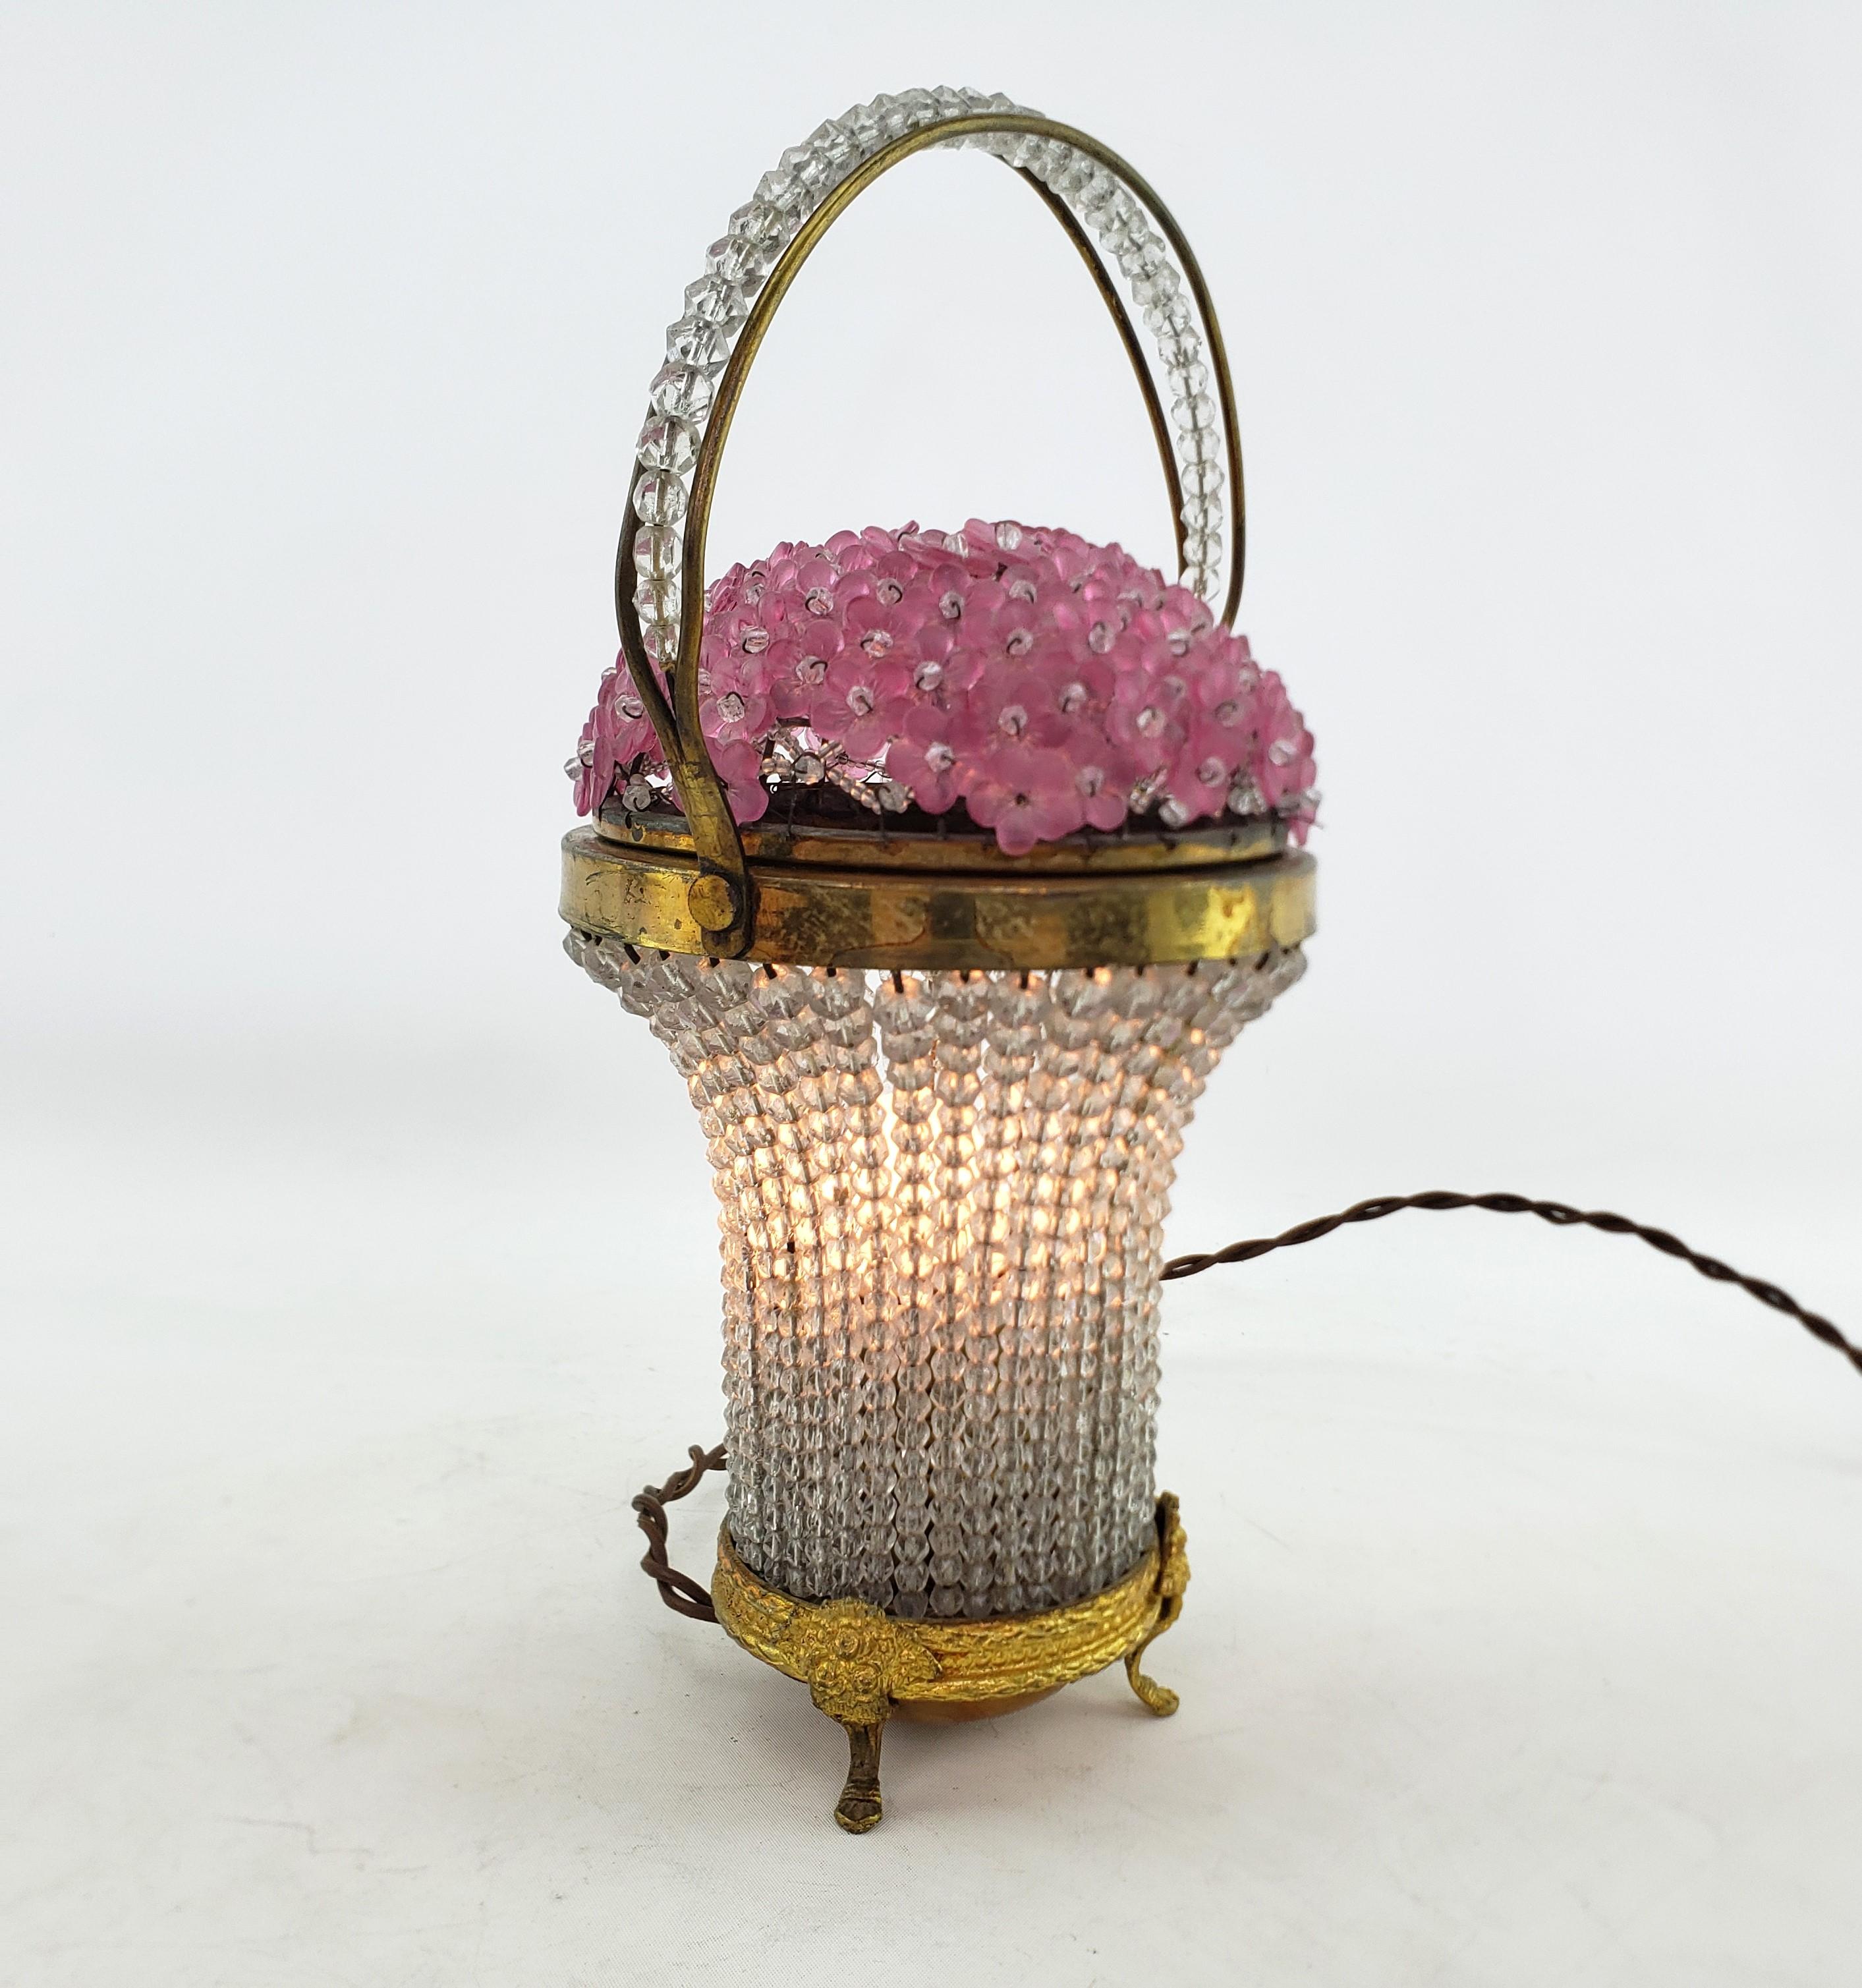 Antique Czech Republic Glass Pink Flower Basket Accent Light or Lamp In Good Condition For Sale In Hamilton, Ontario